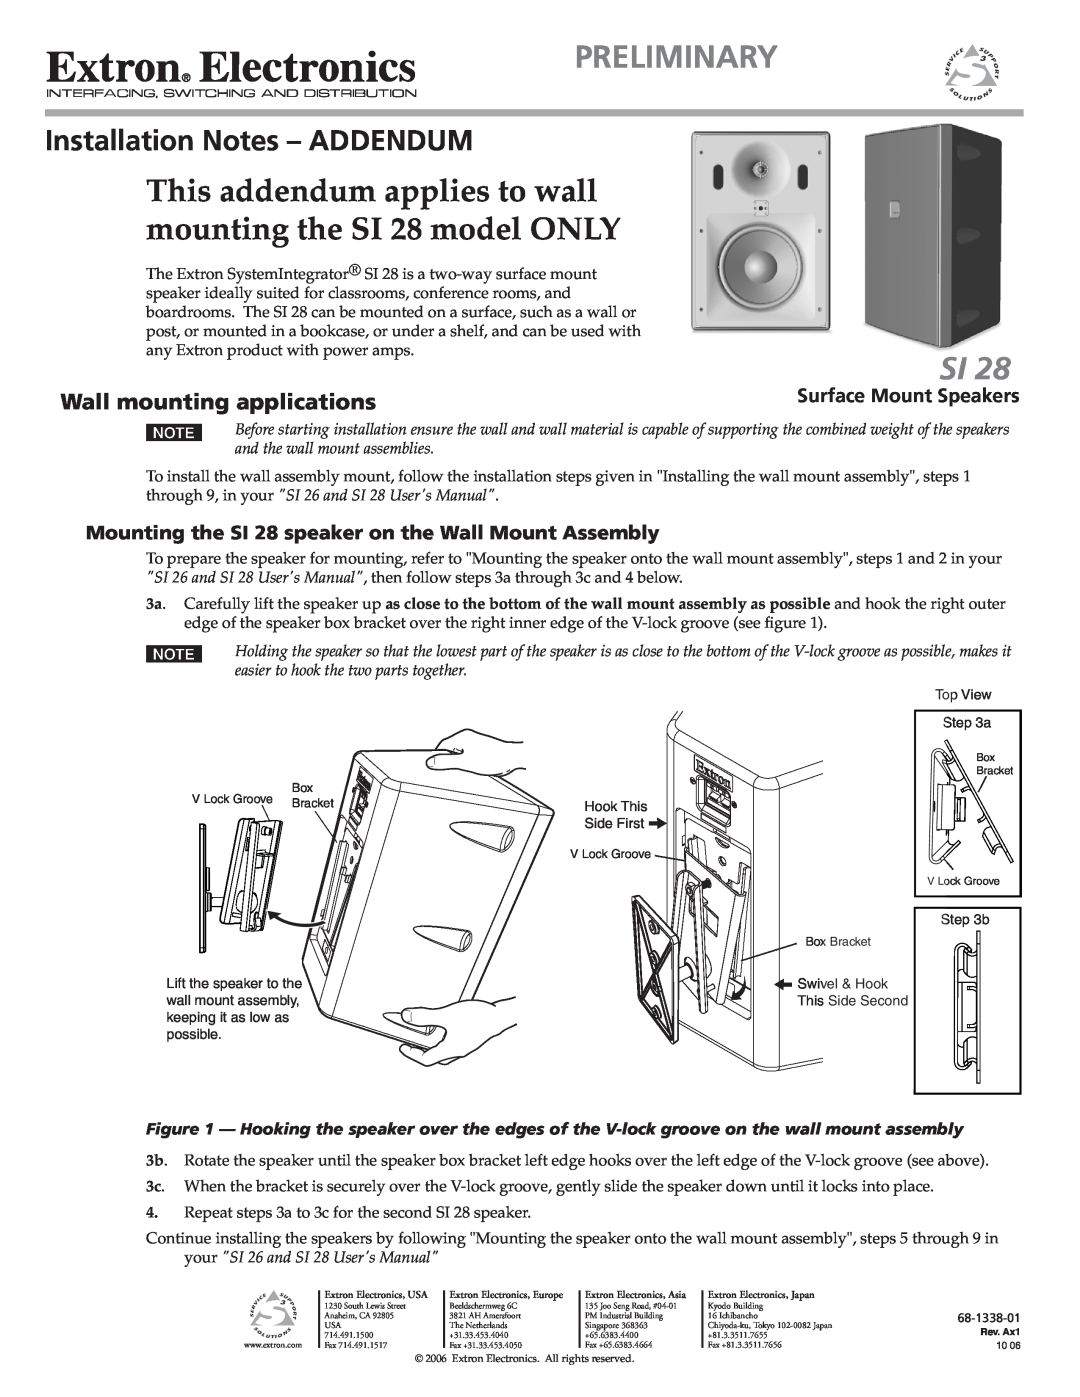 Extron electronic SI 28, SI 26 user manual Preliminary, Installation Notes - ADDENDUM, Wall mounting applications 